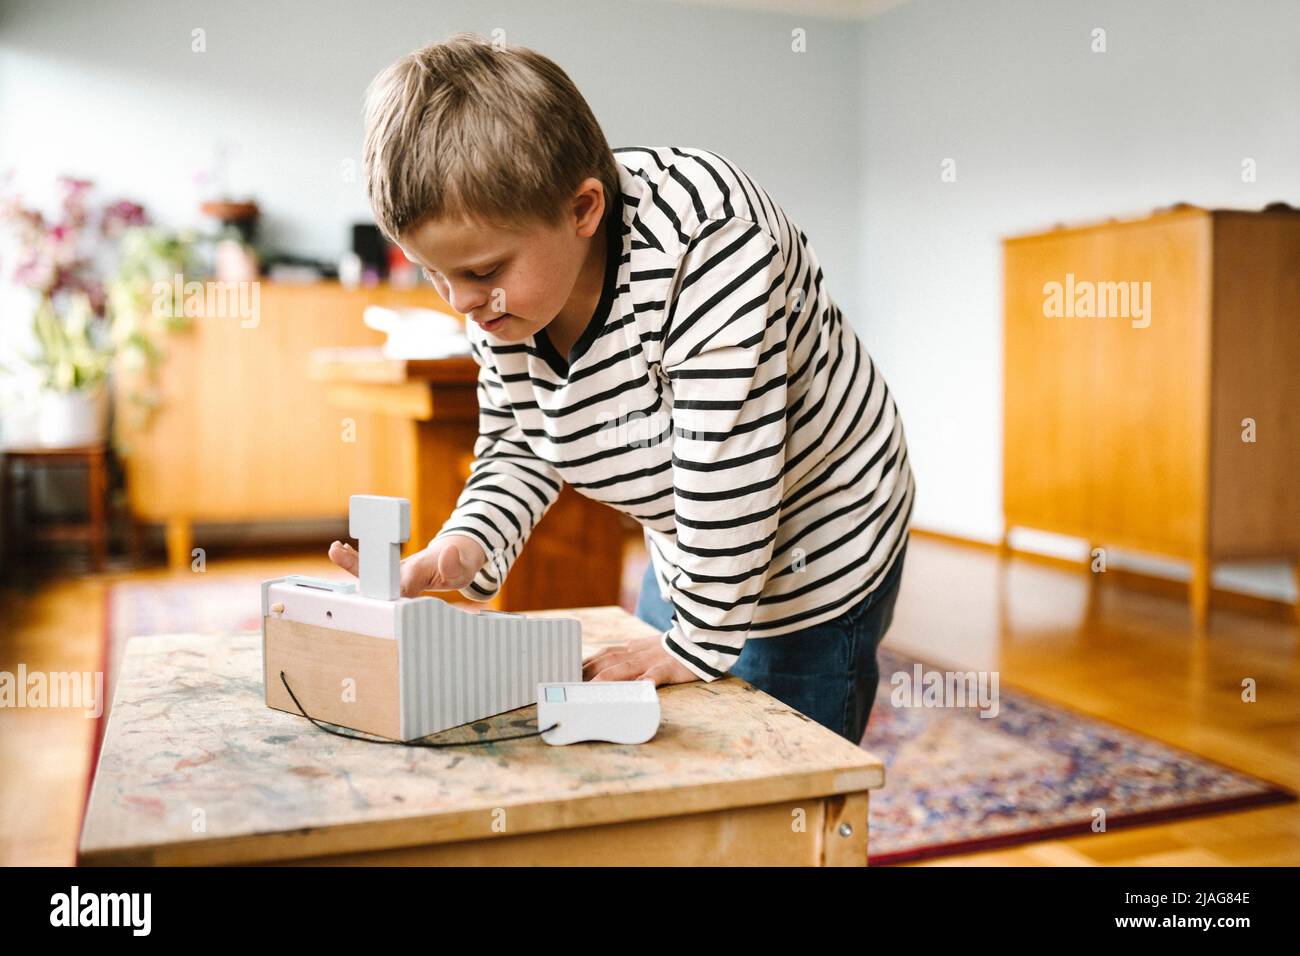 Boy with down syndrome using learning tool on table at home Stock Photo